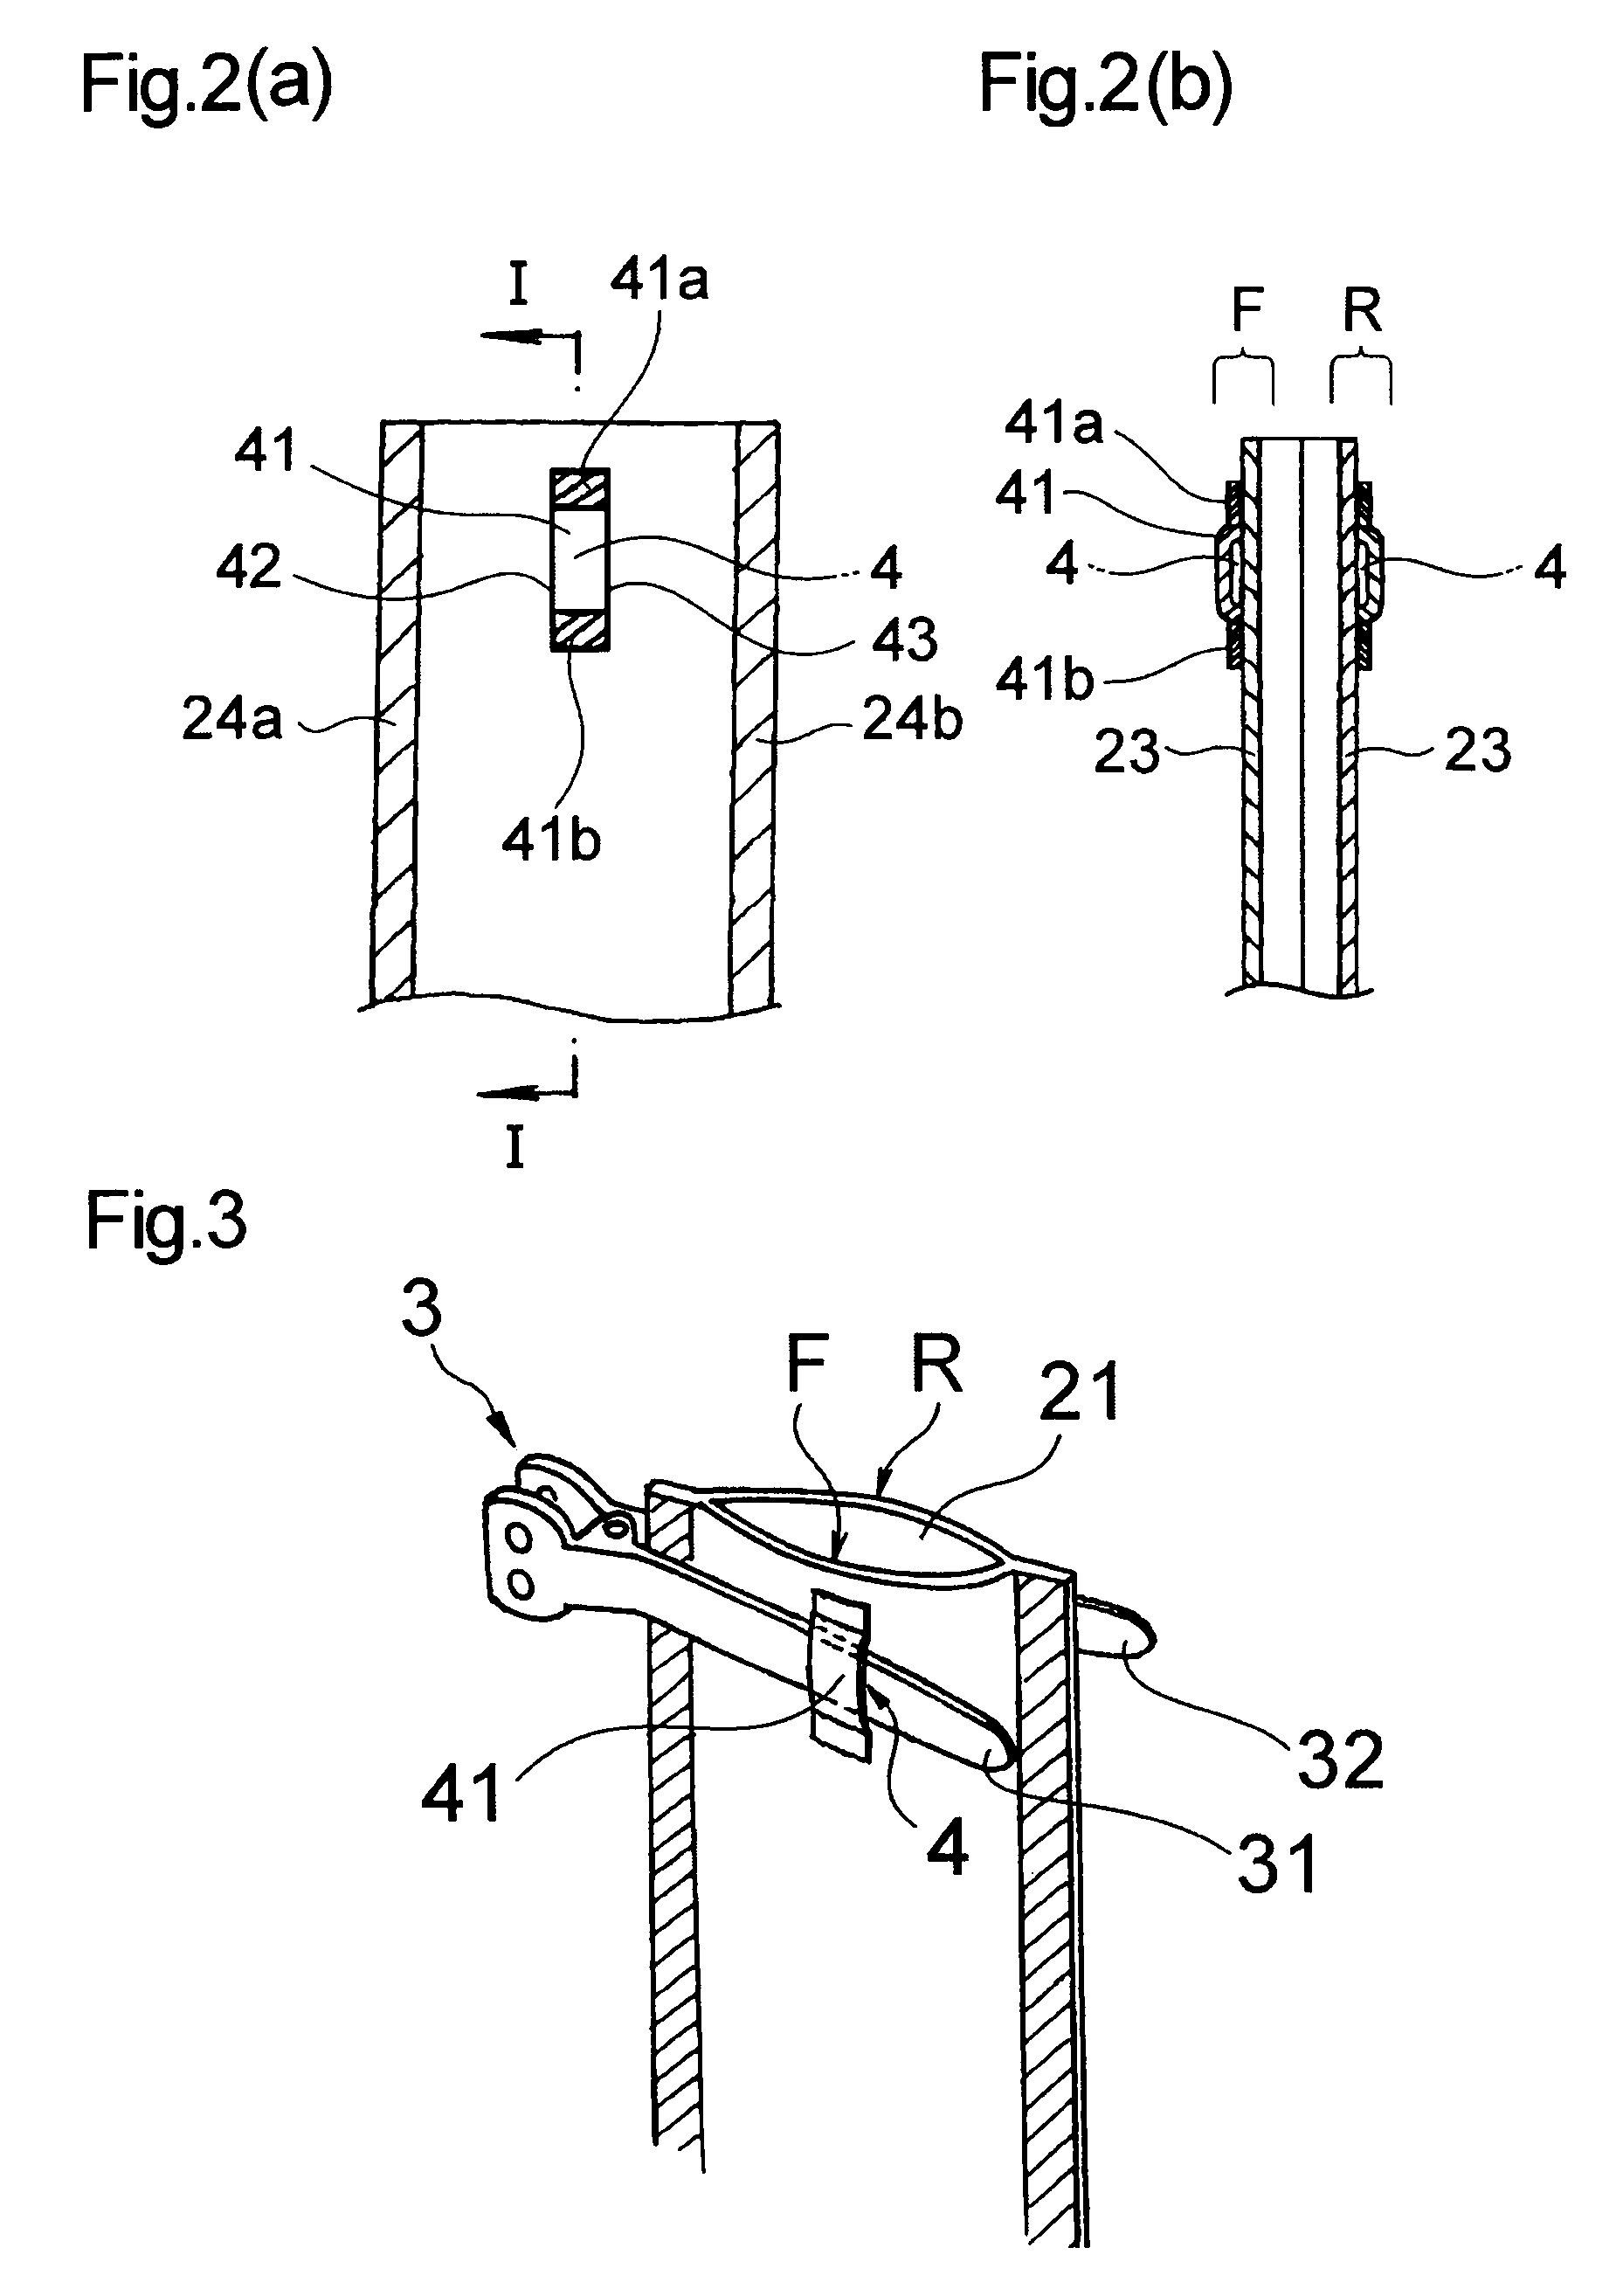 Hair holder, open/close device for hair-holding member, and hair holder for hair treatment